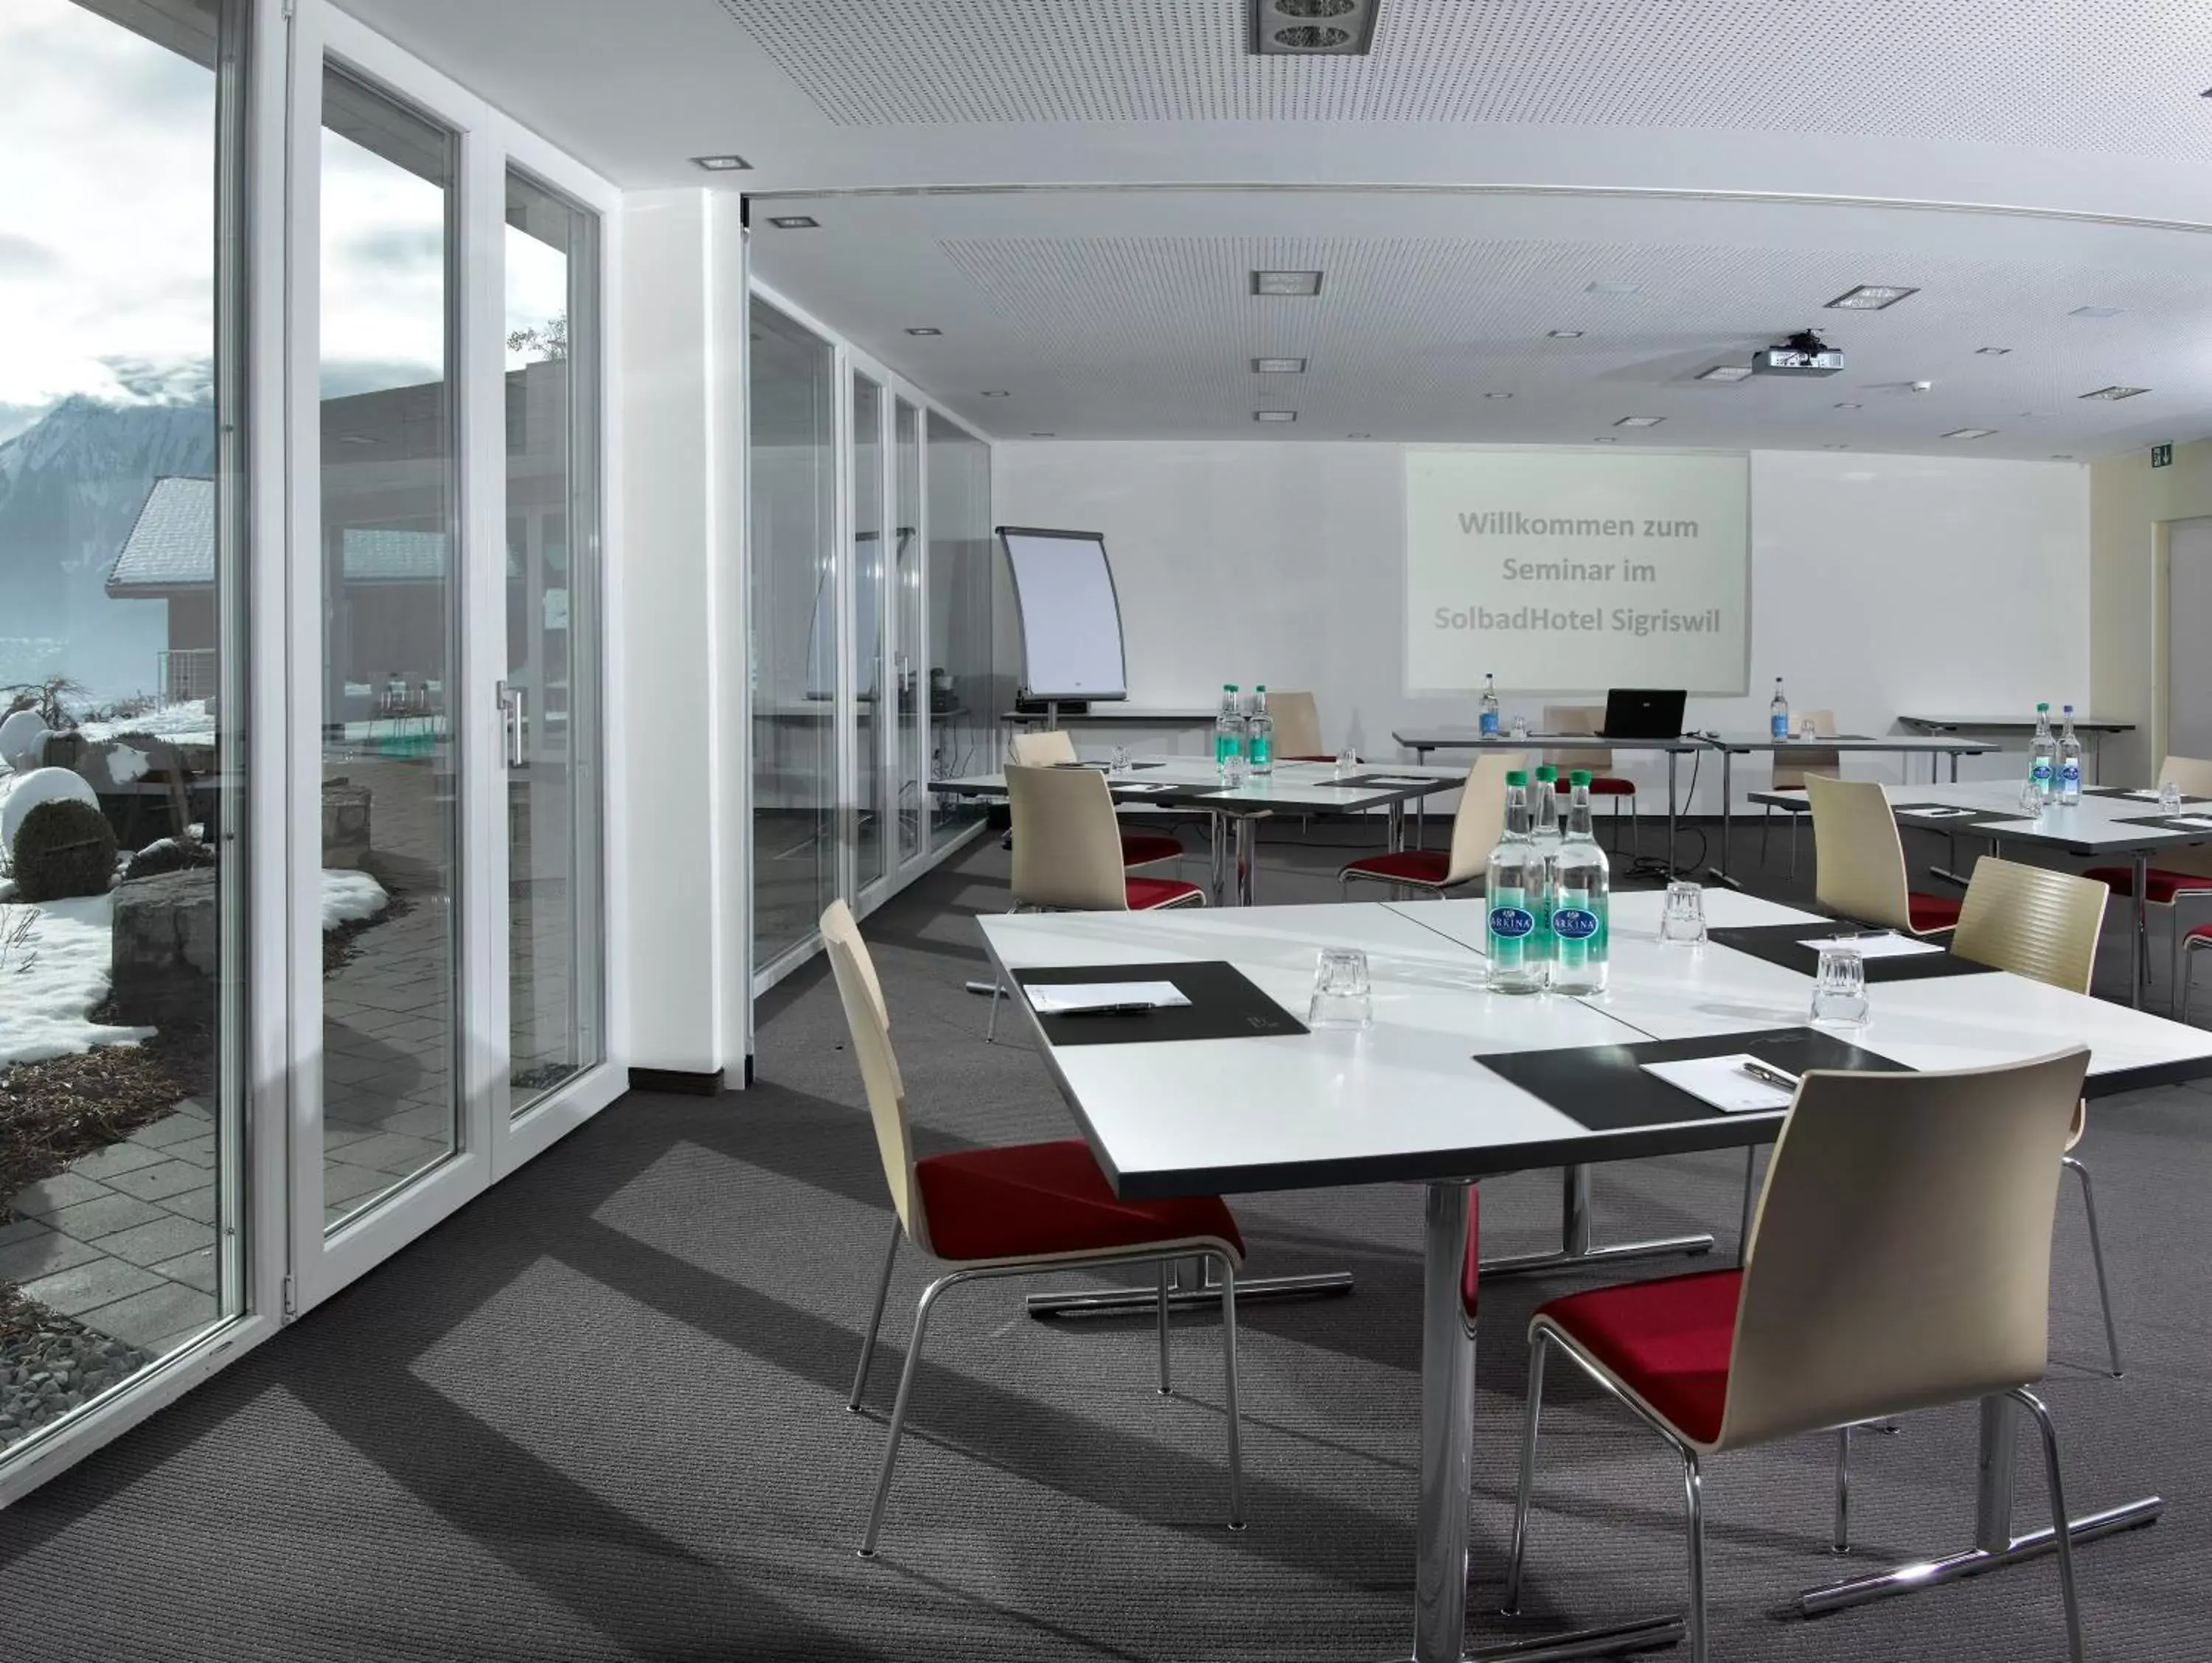 Business facilities in Solbadhotel Sigriswil